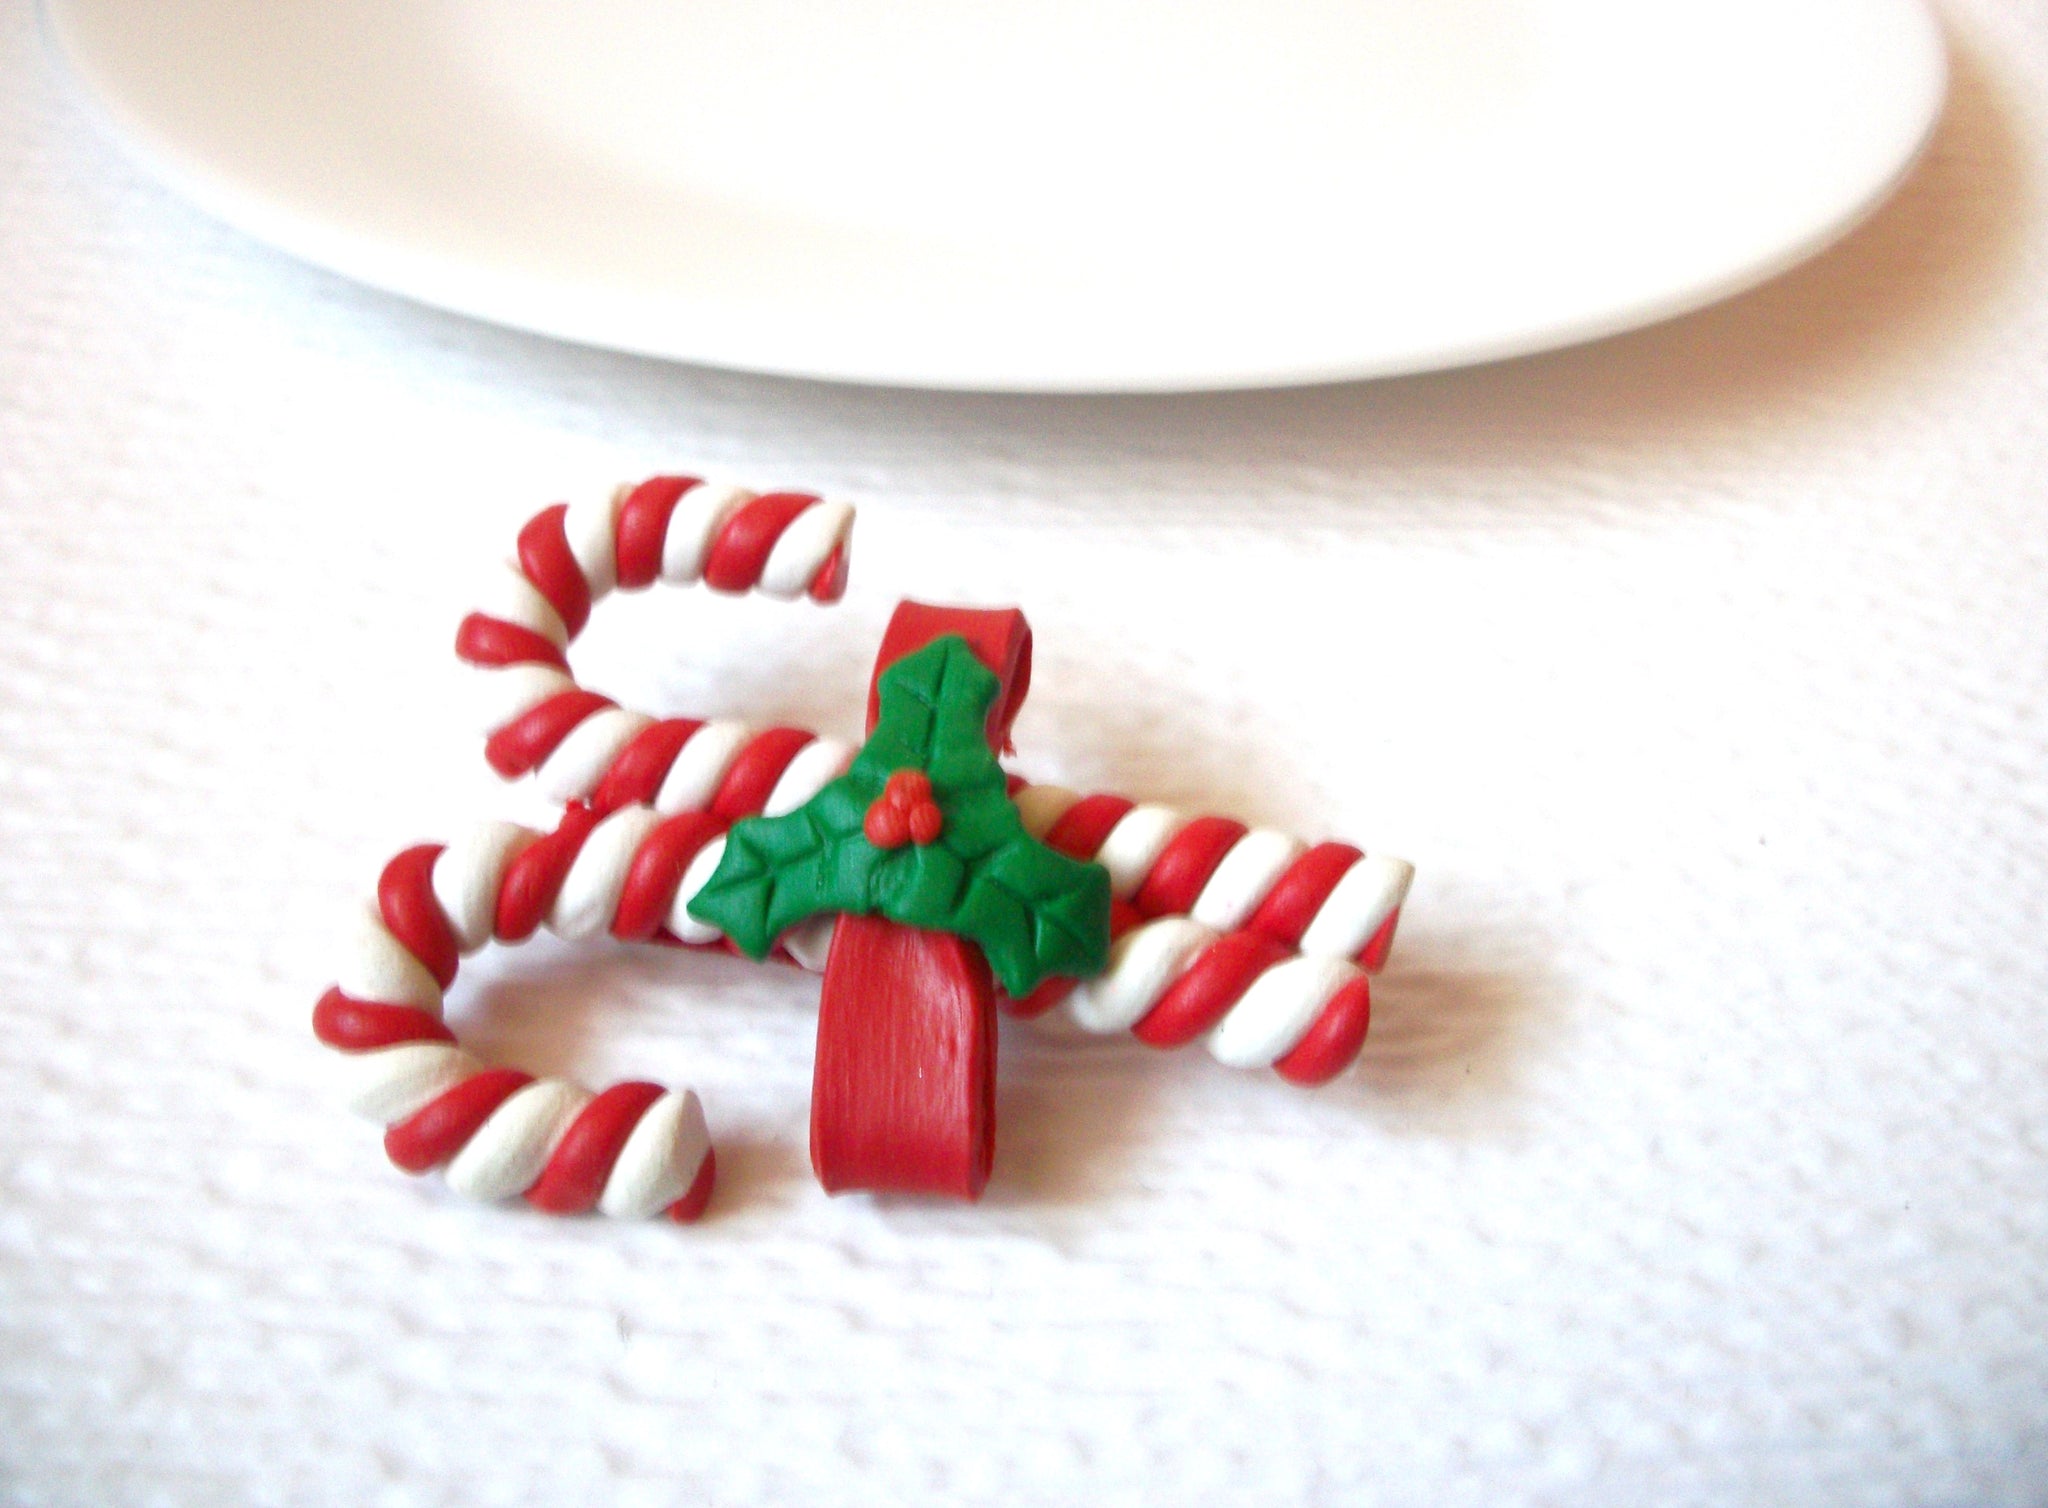 Vintage Christmas Candy Cane Brooch Pin 102120